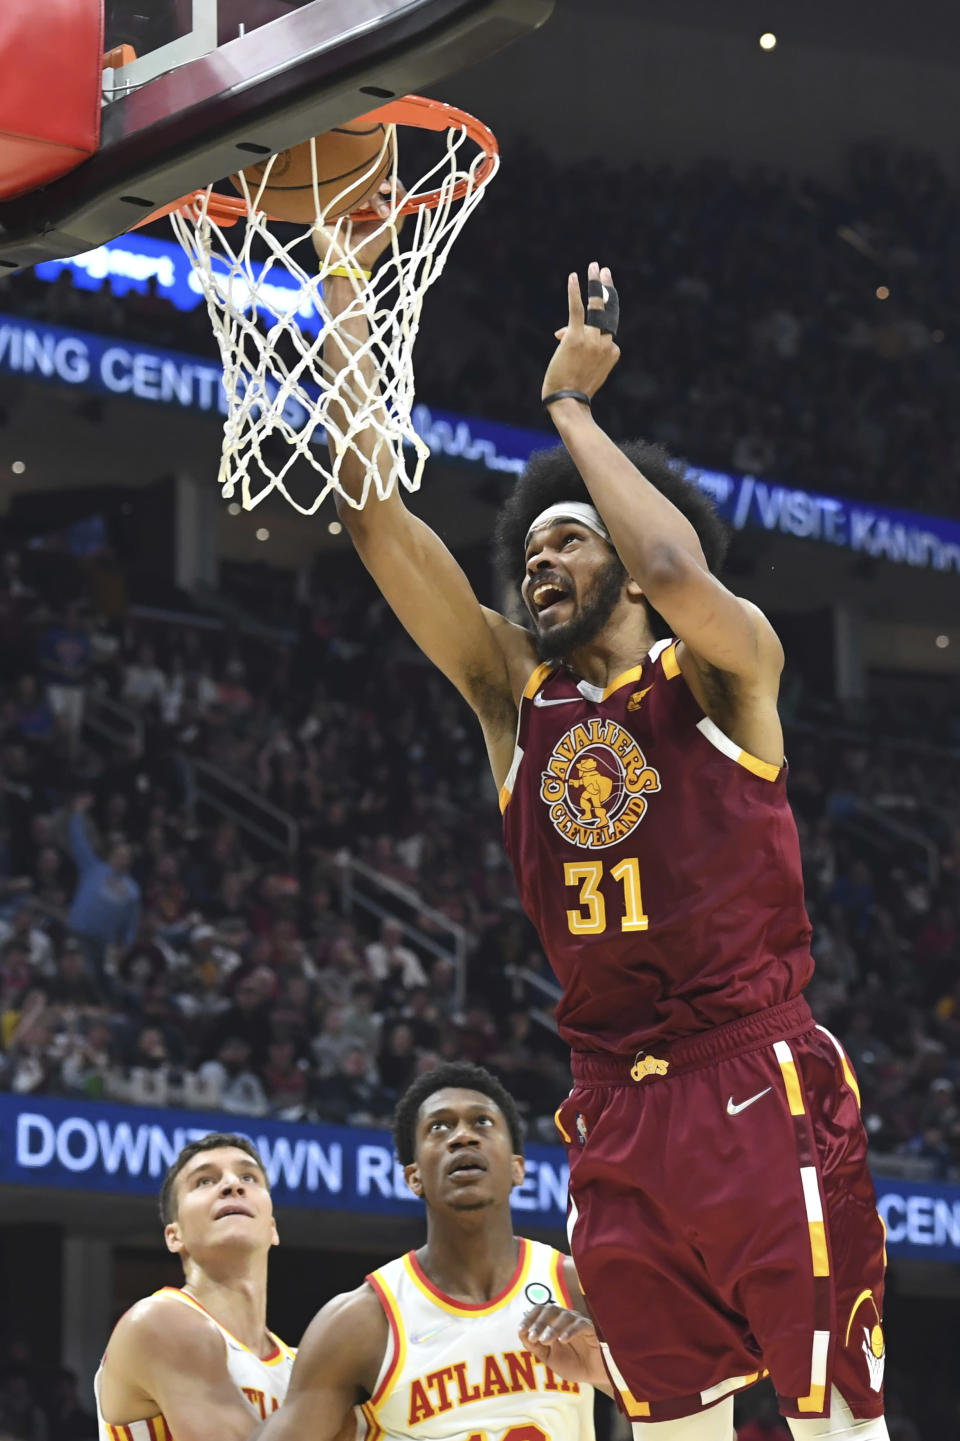 Cleveland Cavaliers' Jarrett Allen dunks during the first half of the team's NBA play-in basketball game against the Atlanta Hawks on Friday, April 15, 2022, in Cleveland. (AP Photo/Nick Cammett)